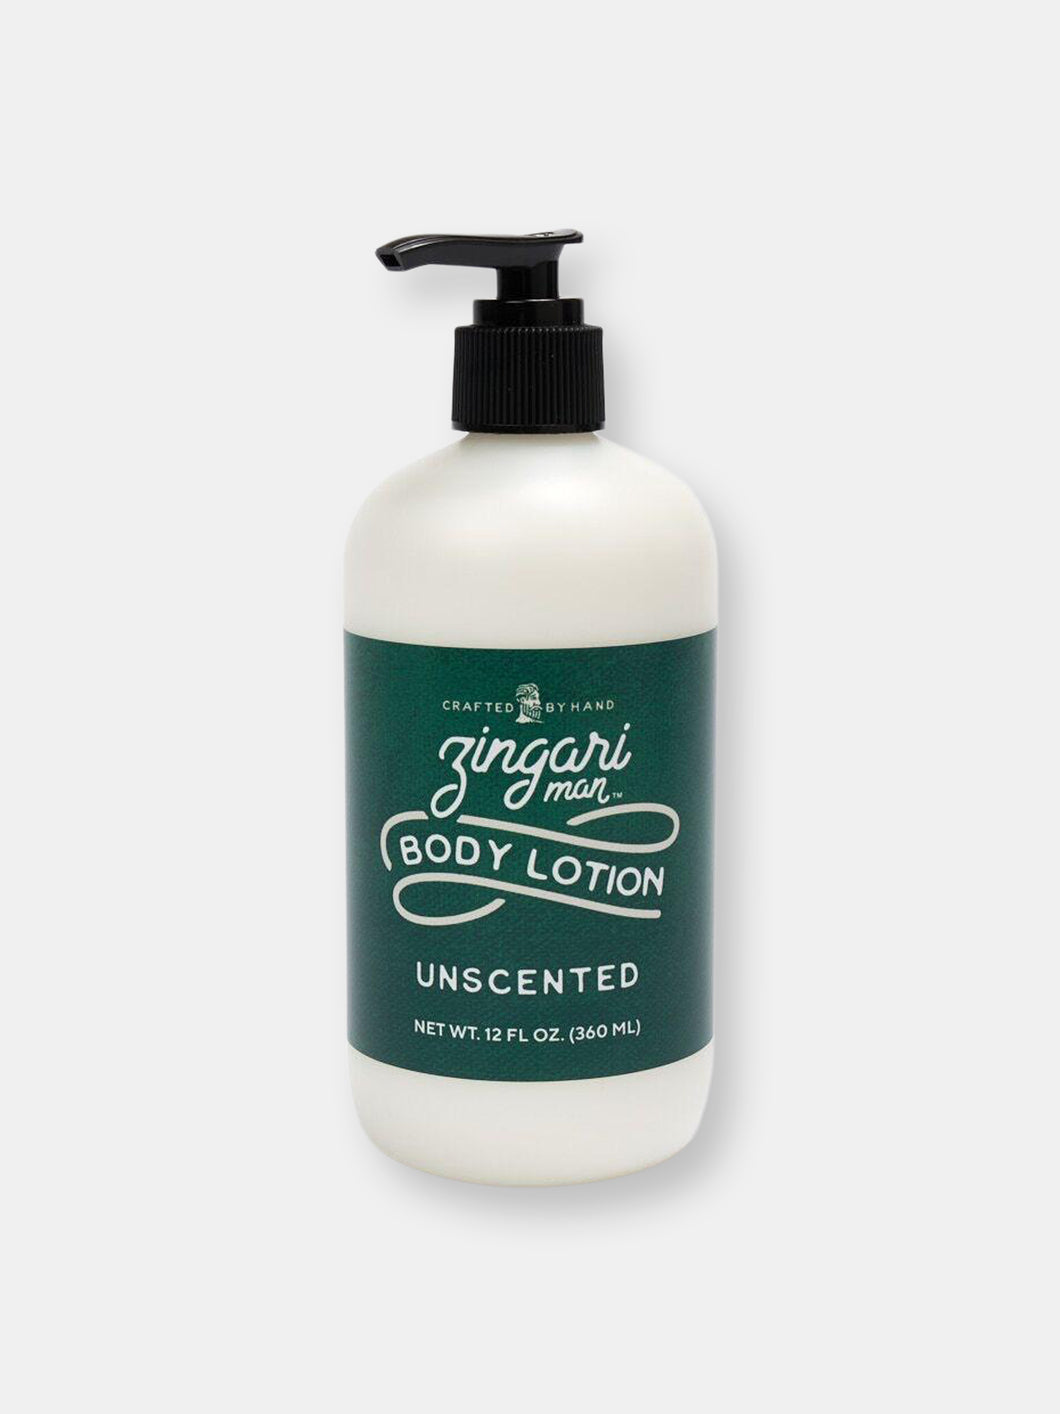 Unscented body lotion